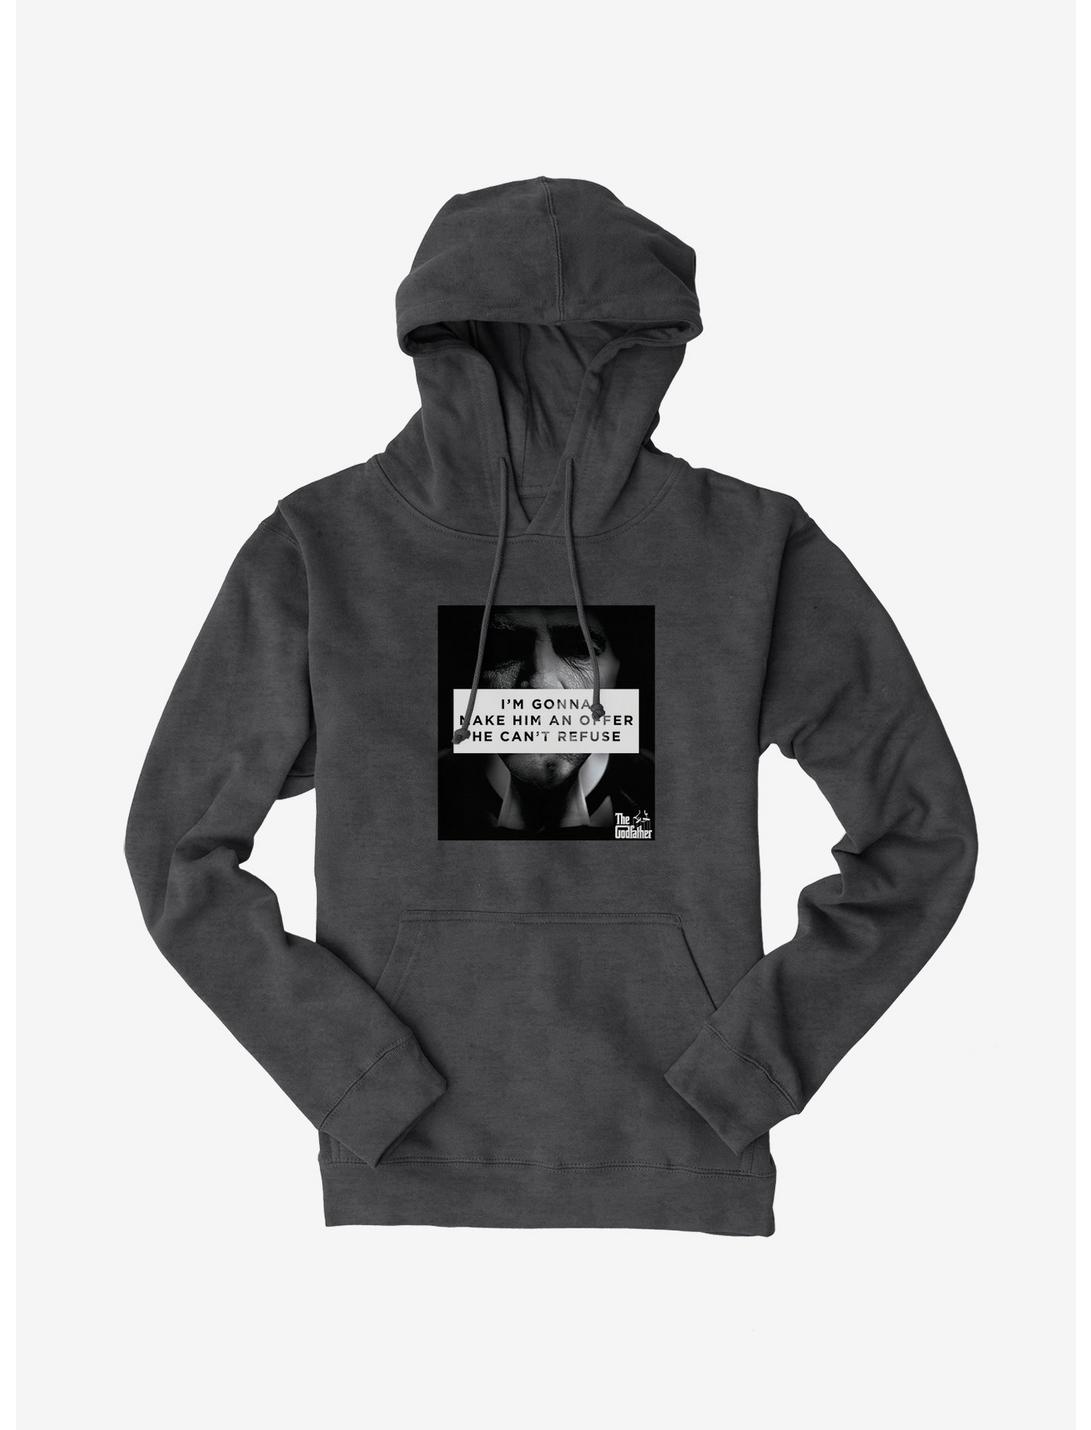 The Godfather An Offer He Can't Refuse Hoodie, , hi-res